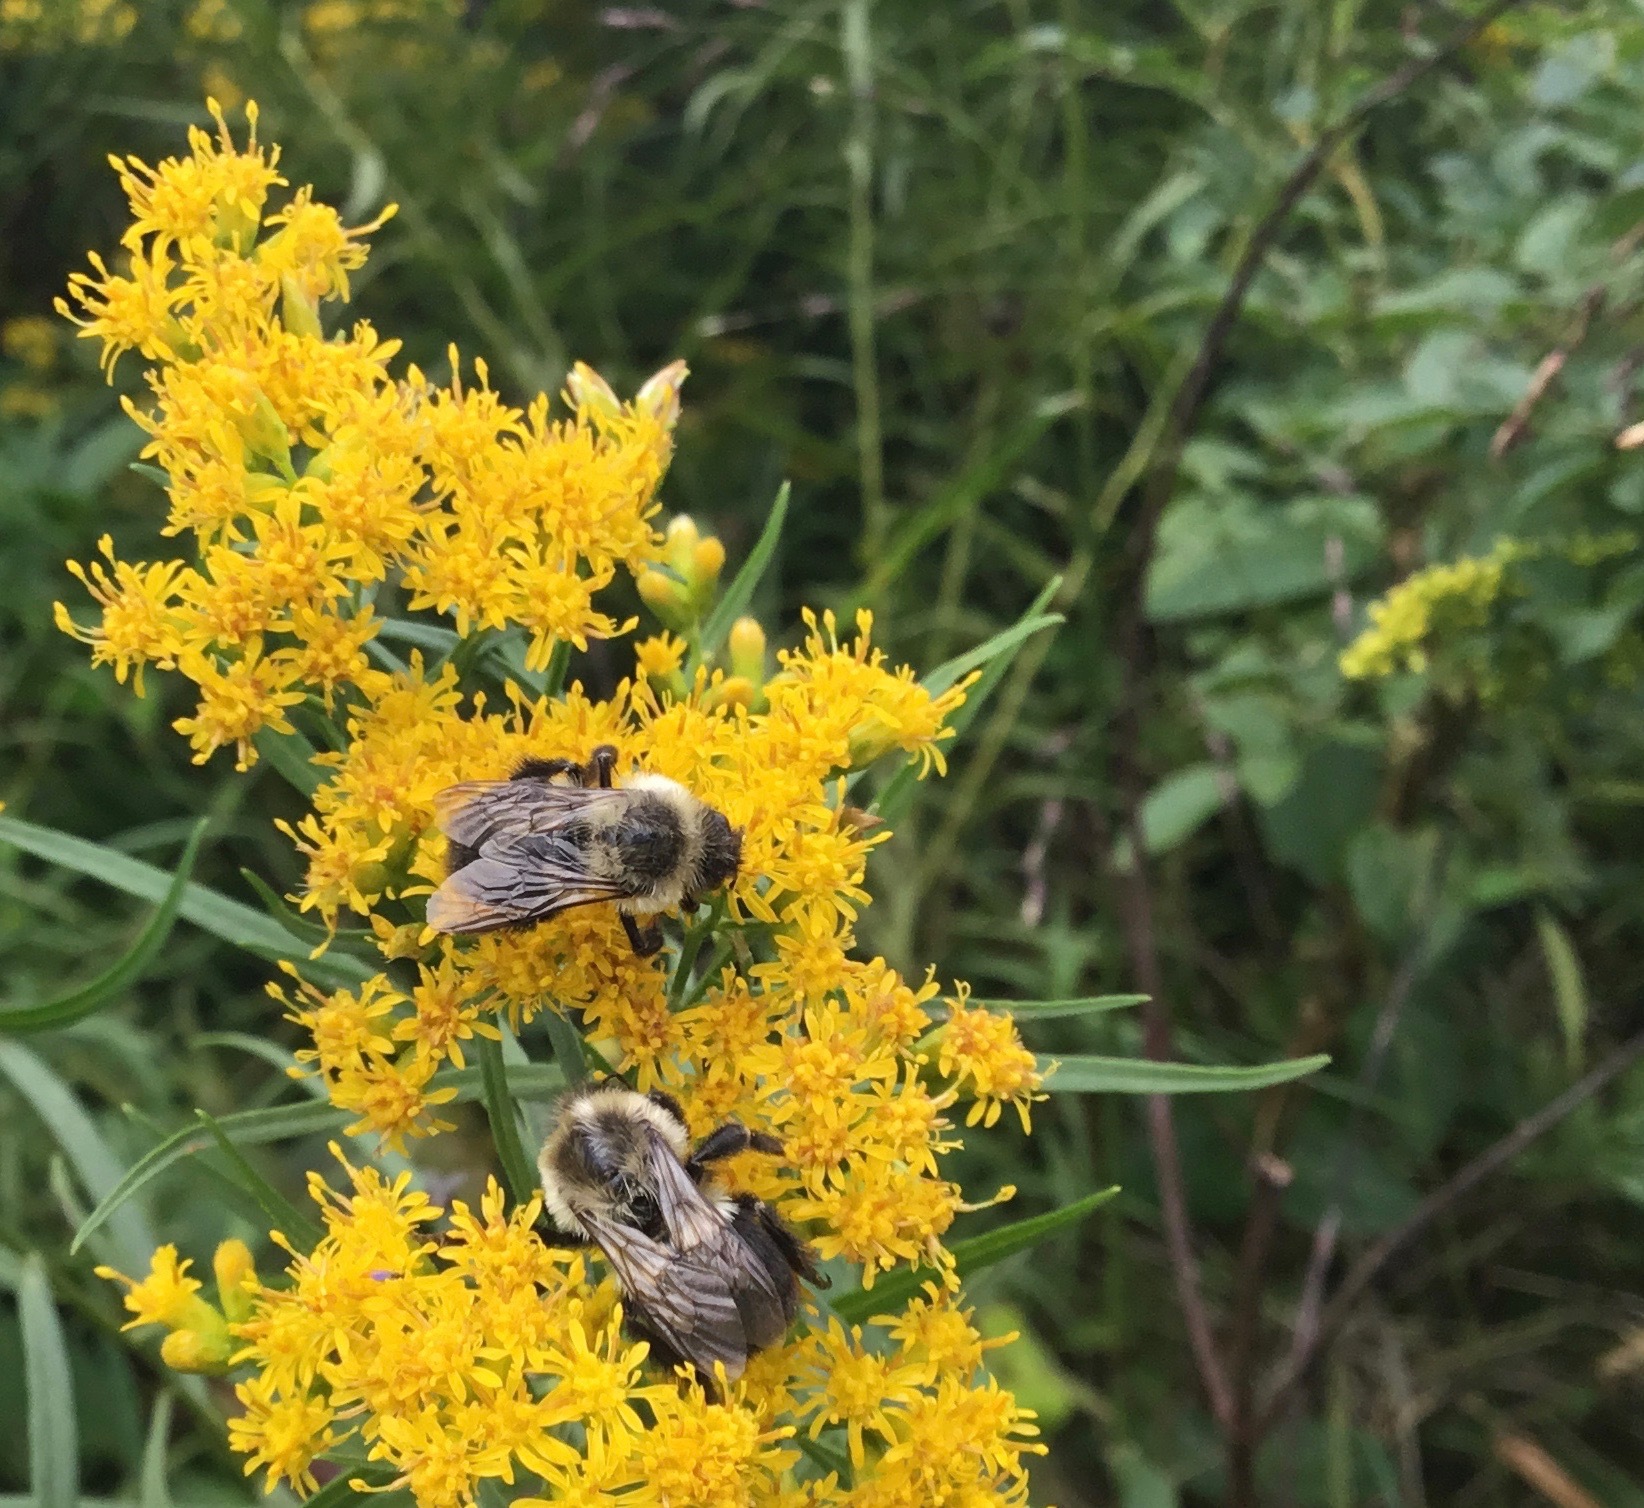 The native goldenrod looks like ragweed but doesn’t cause allergies. It attracts a huge variety of native pollinators, whose sting isn’t nearly as painful as that of non-natives. TIM PURTELL